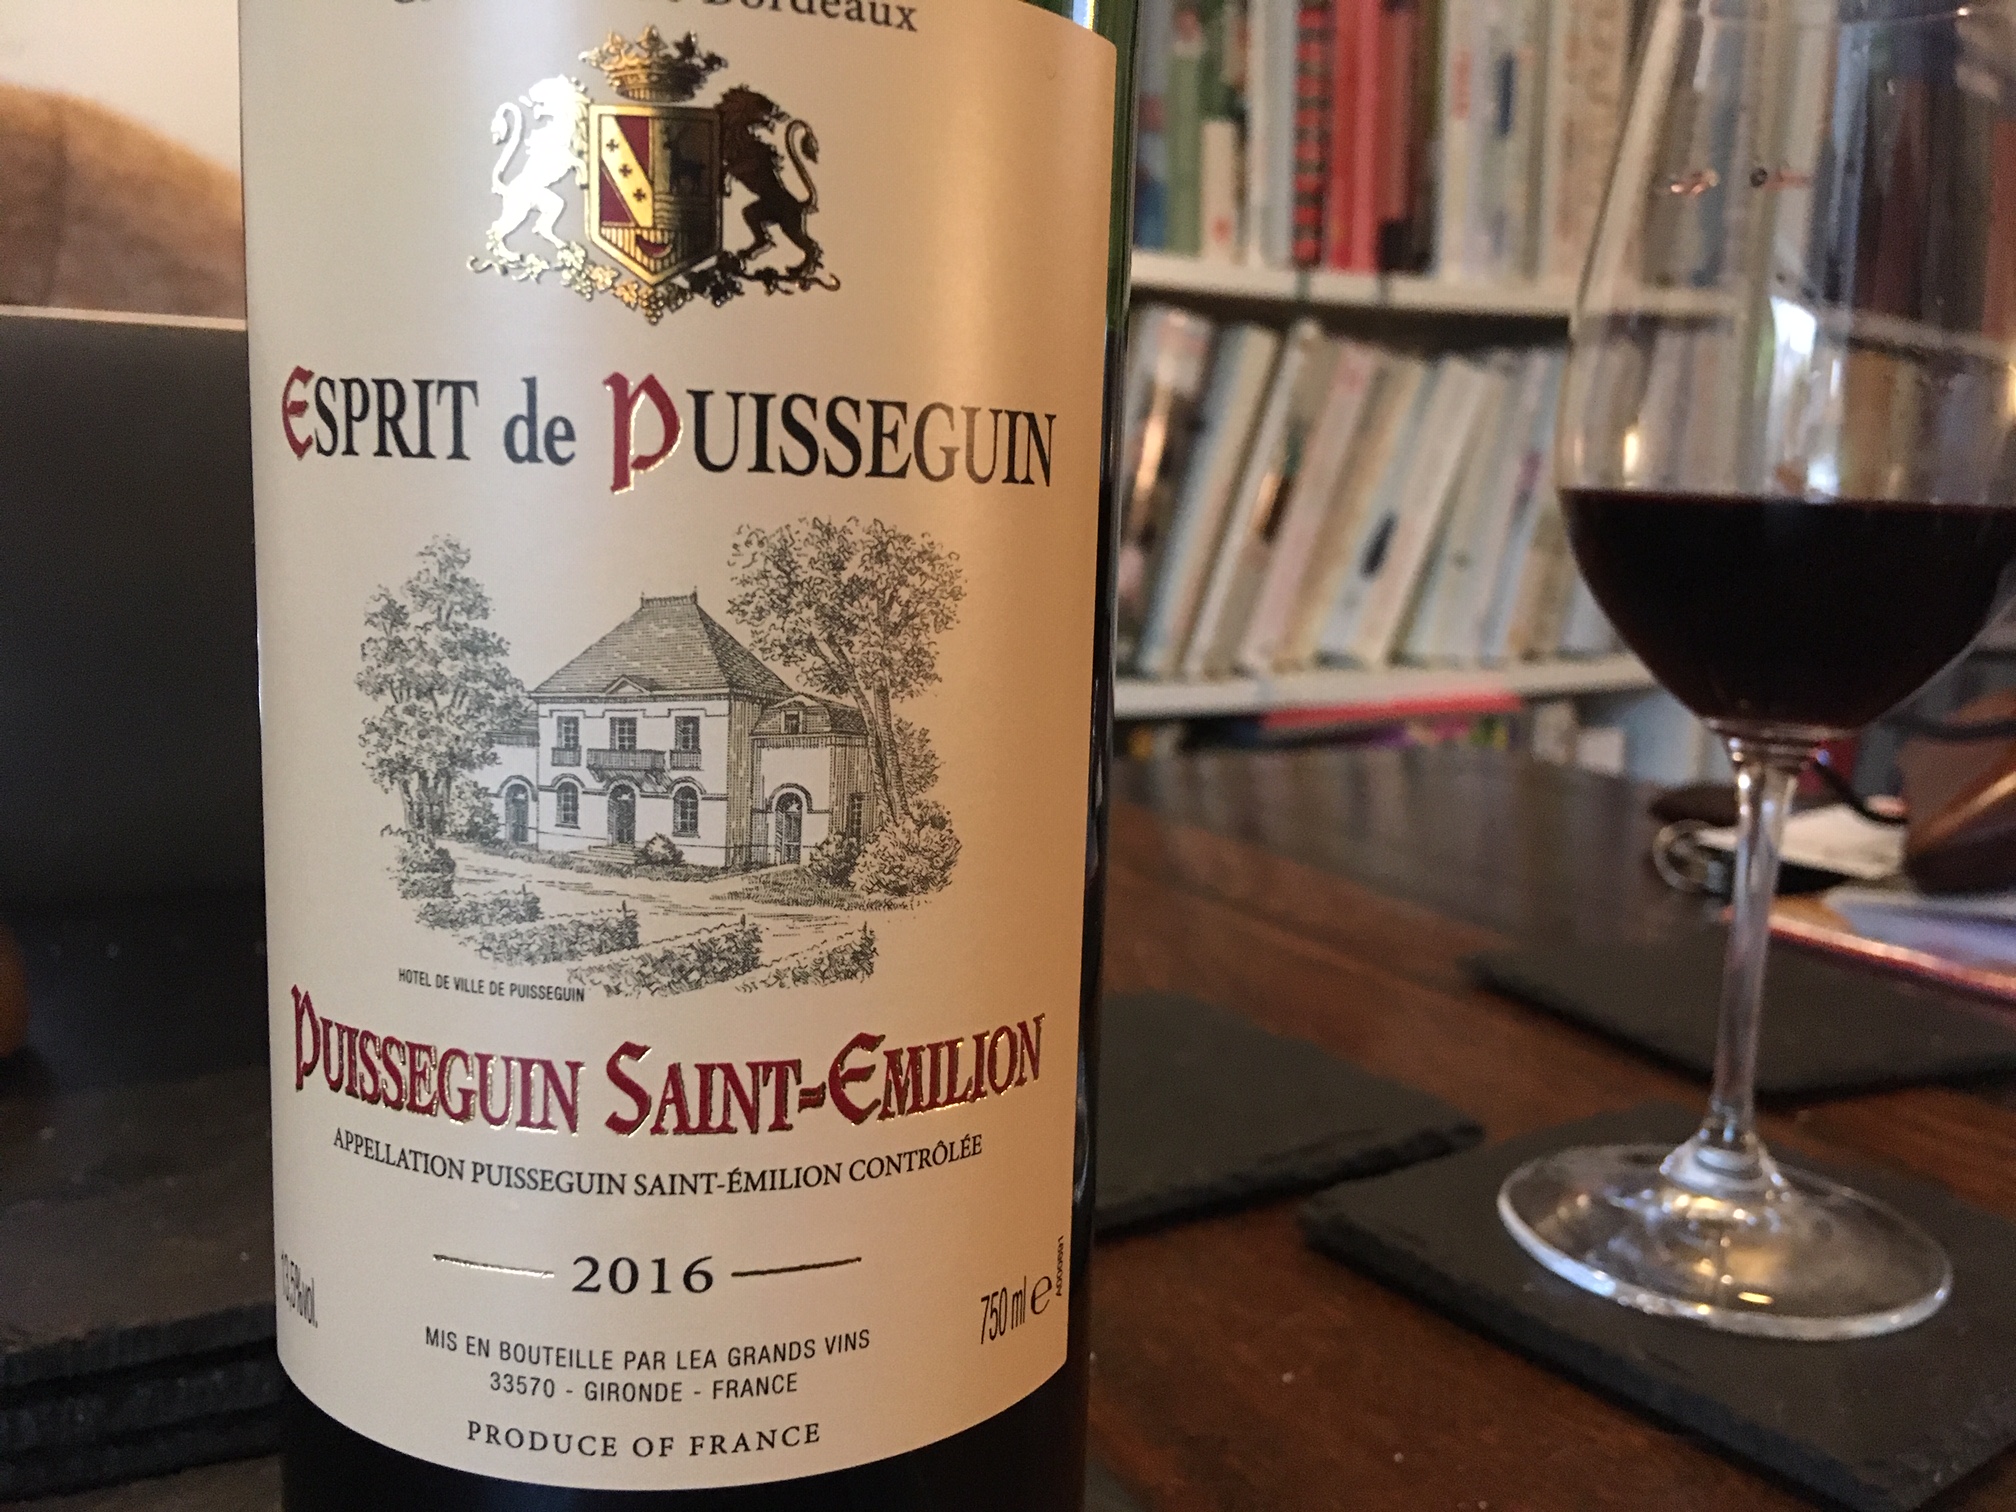 Bottle of red Bordeaux from Esprit de Puisseguin and full glass